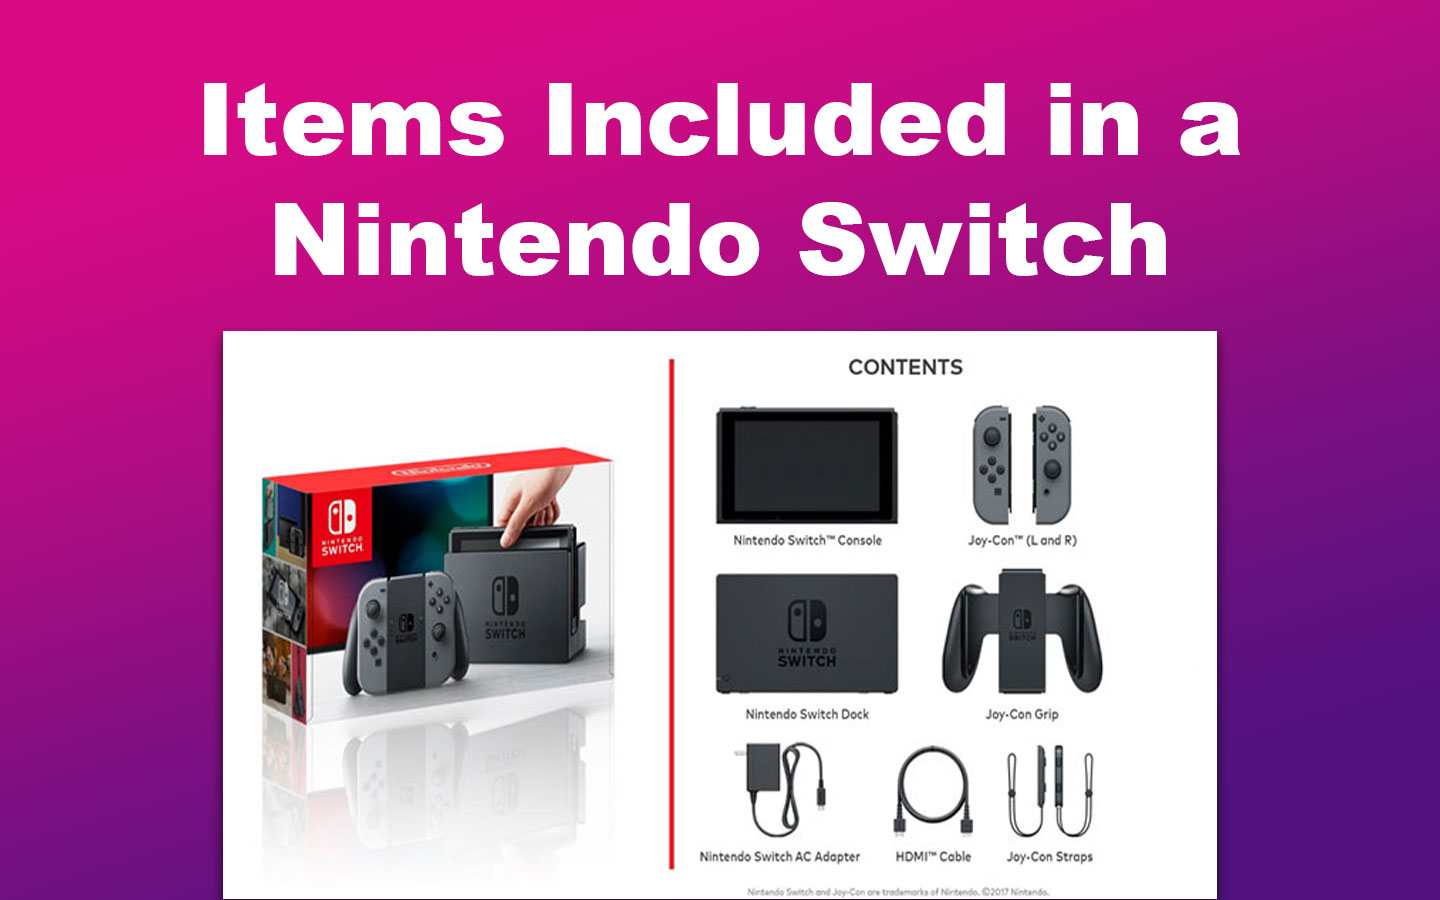 Items Included in a Nintendo Switch